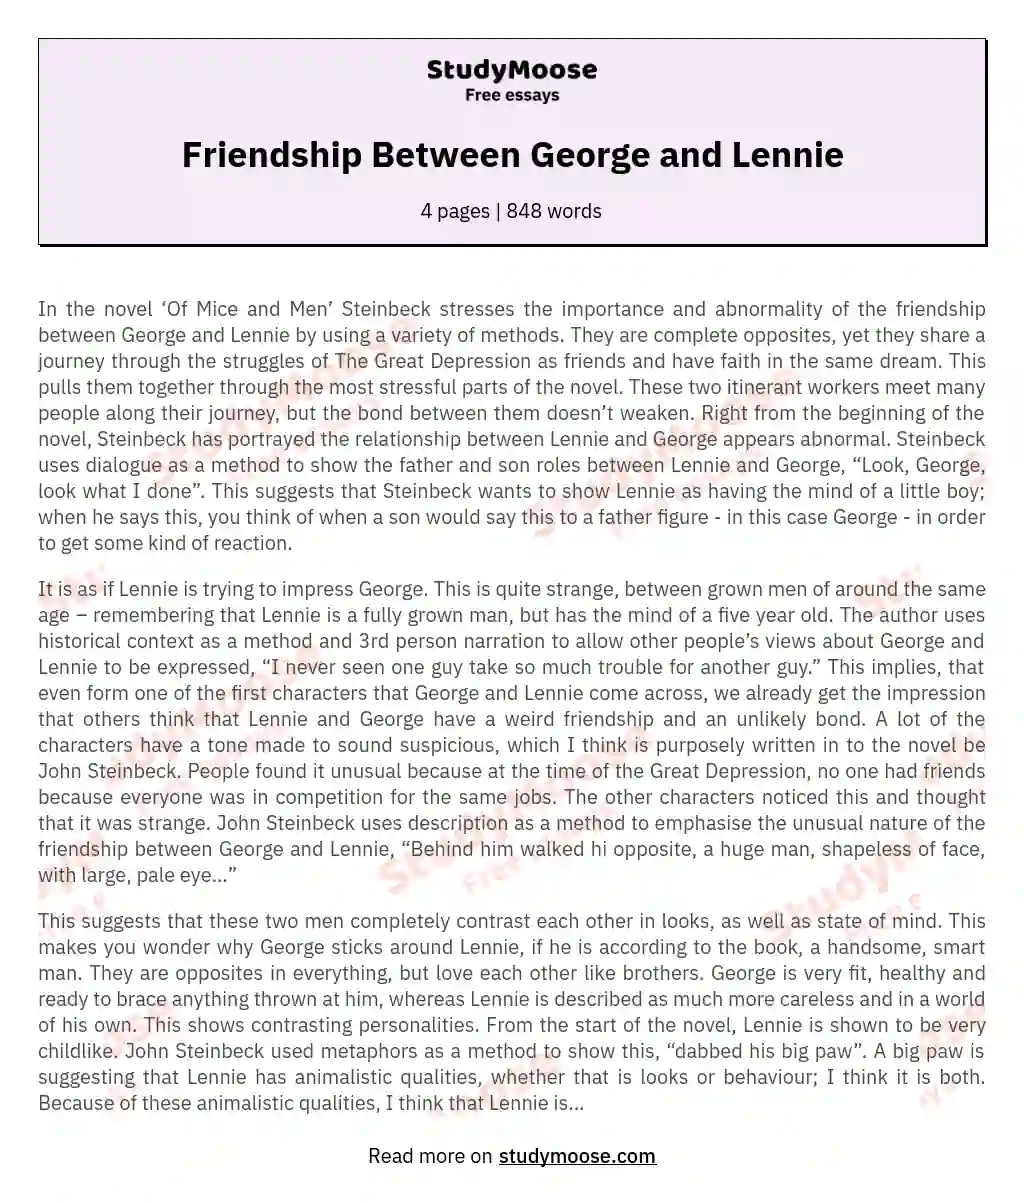 George and Lennie's Bond Amid the Great Depression essay